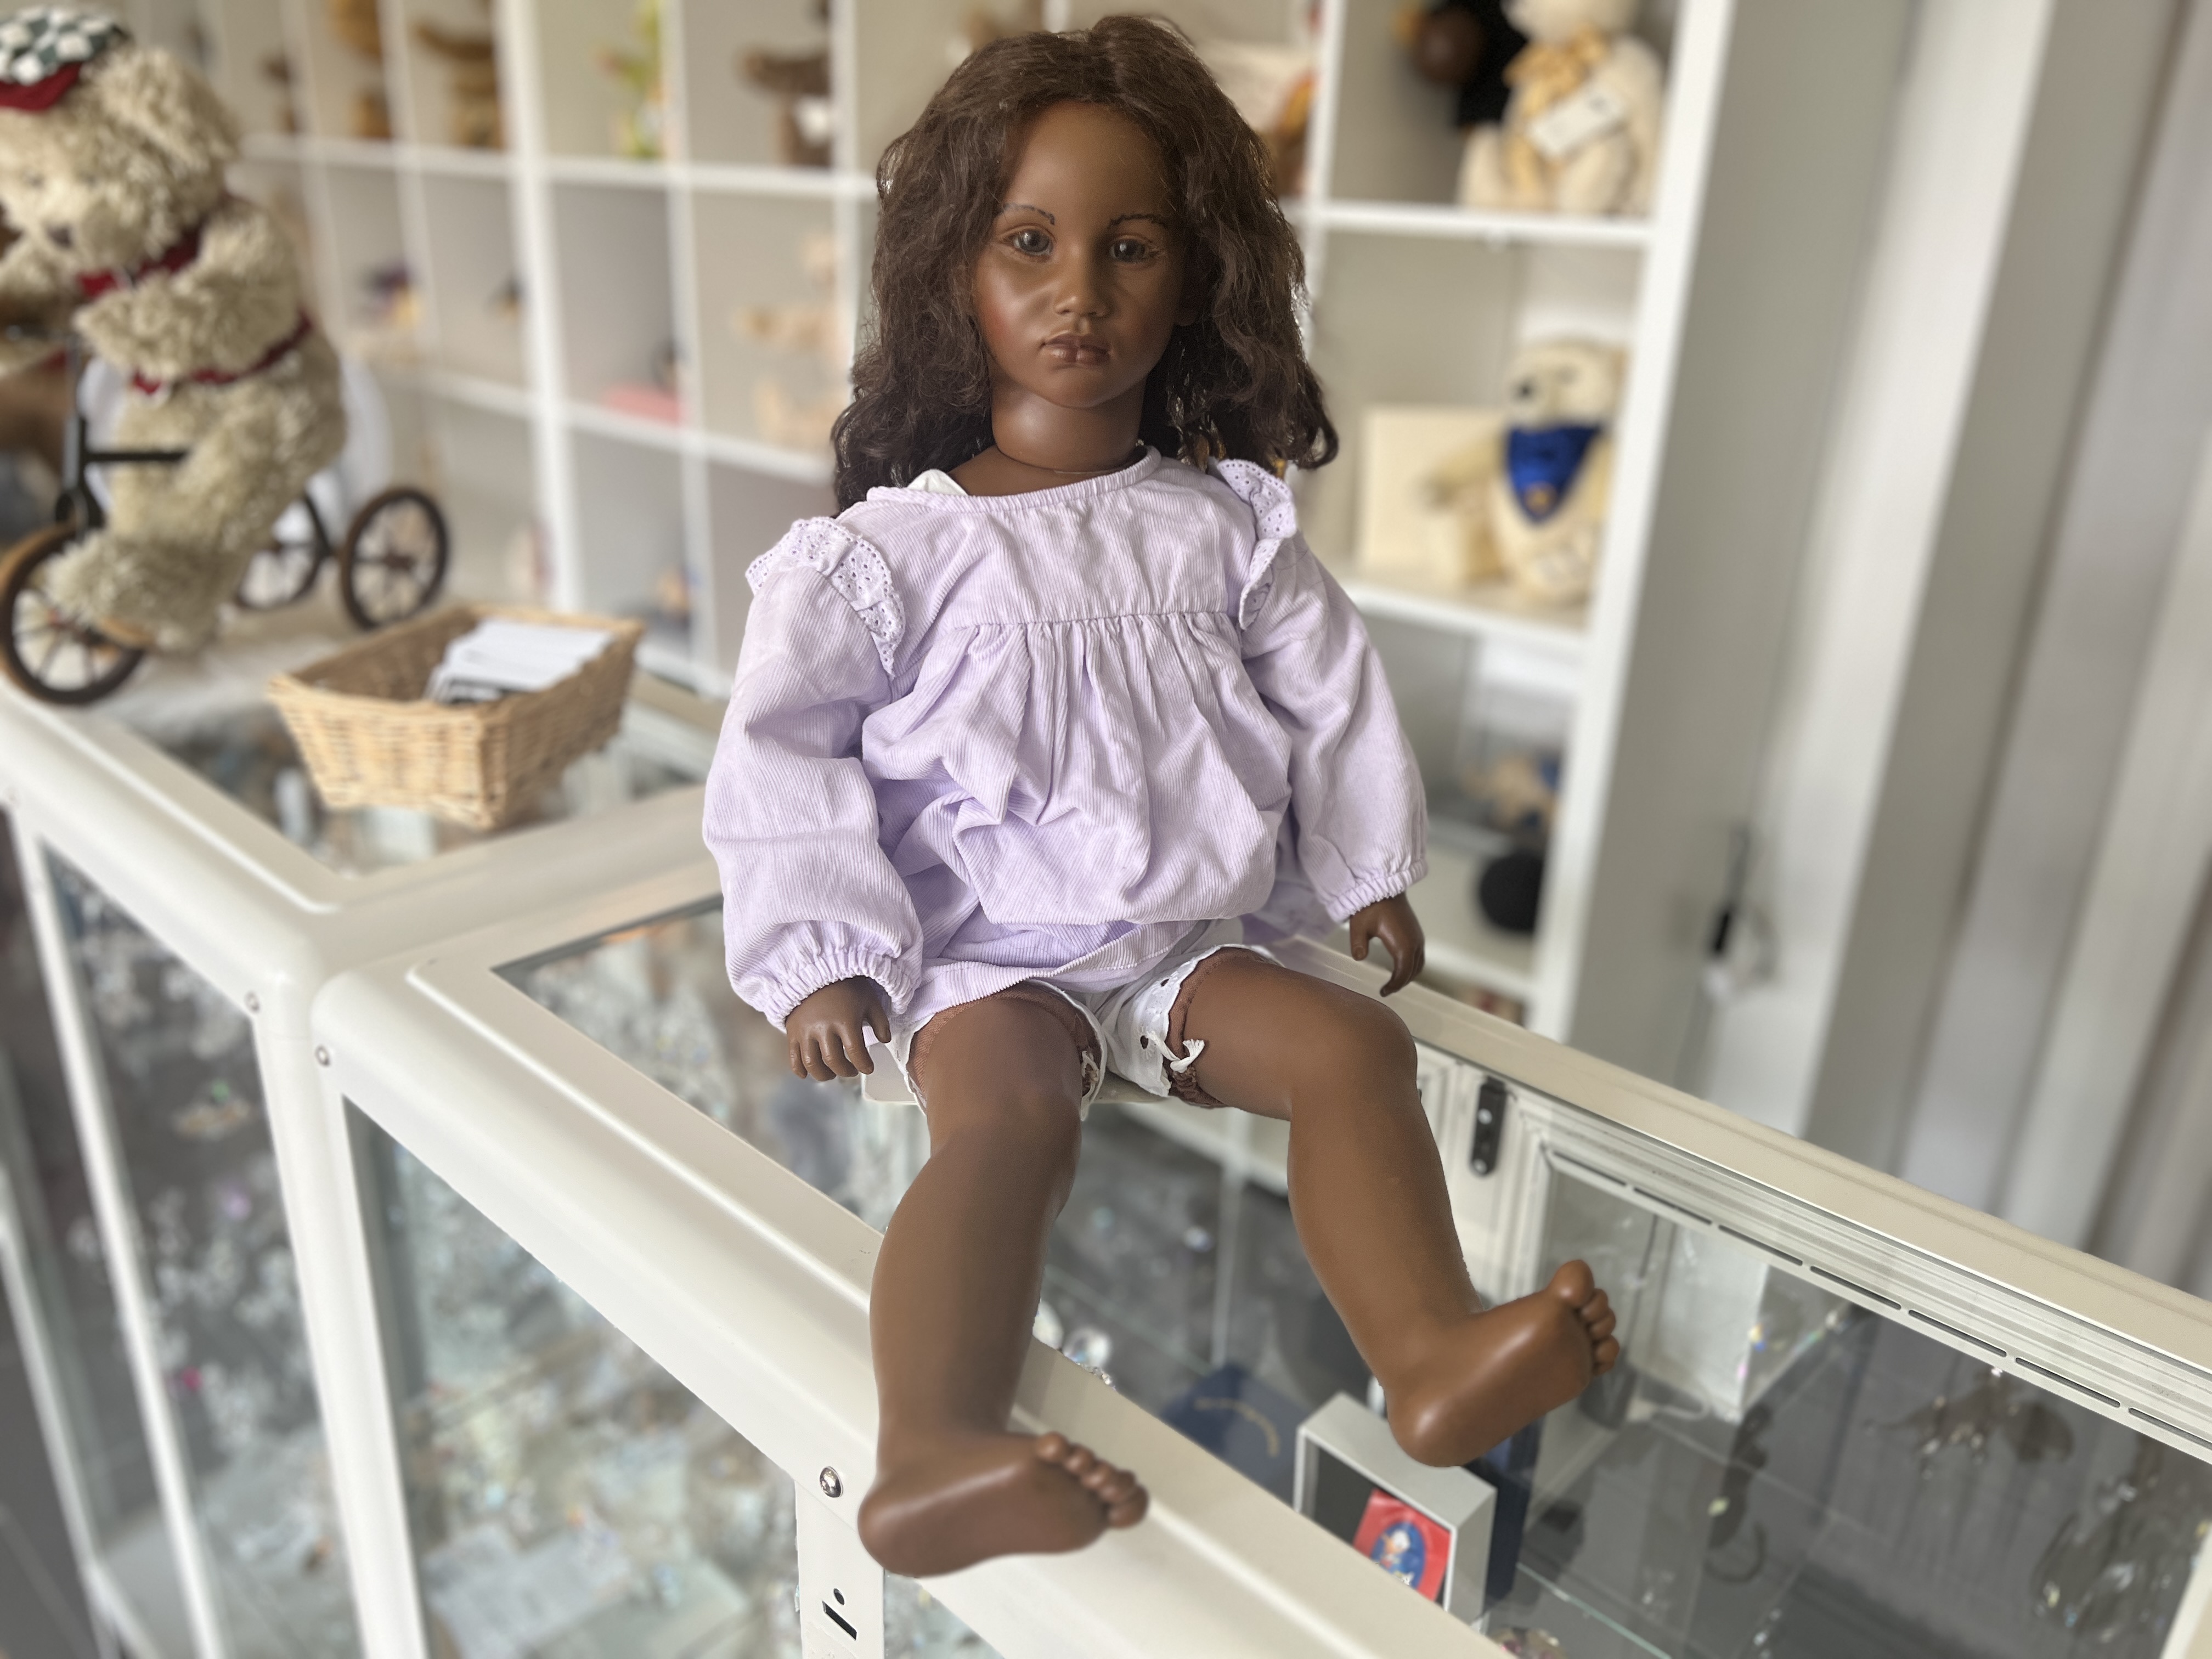  Annette Himstedt Puppe Fatou 60 cm. Top Zustand   